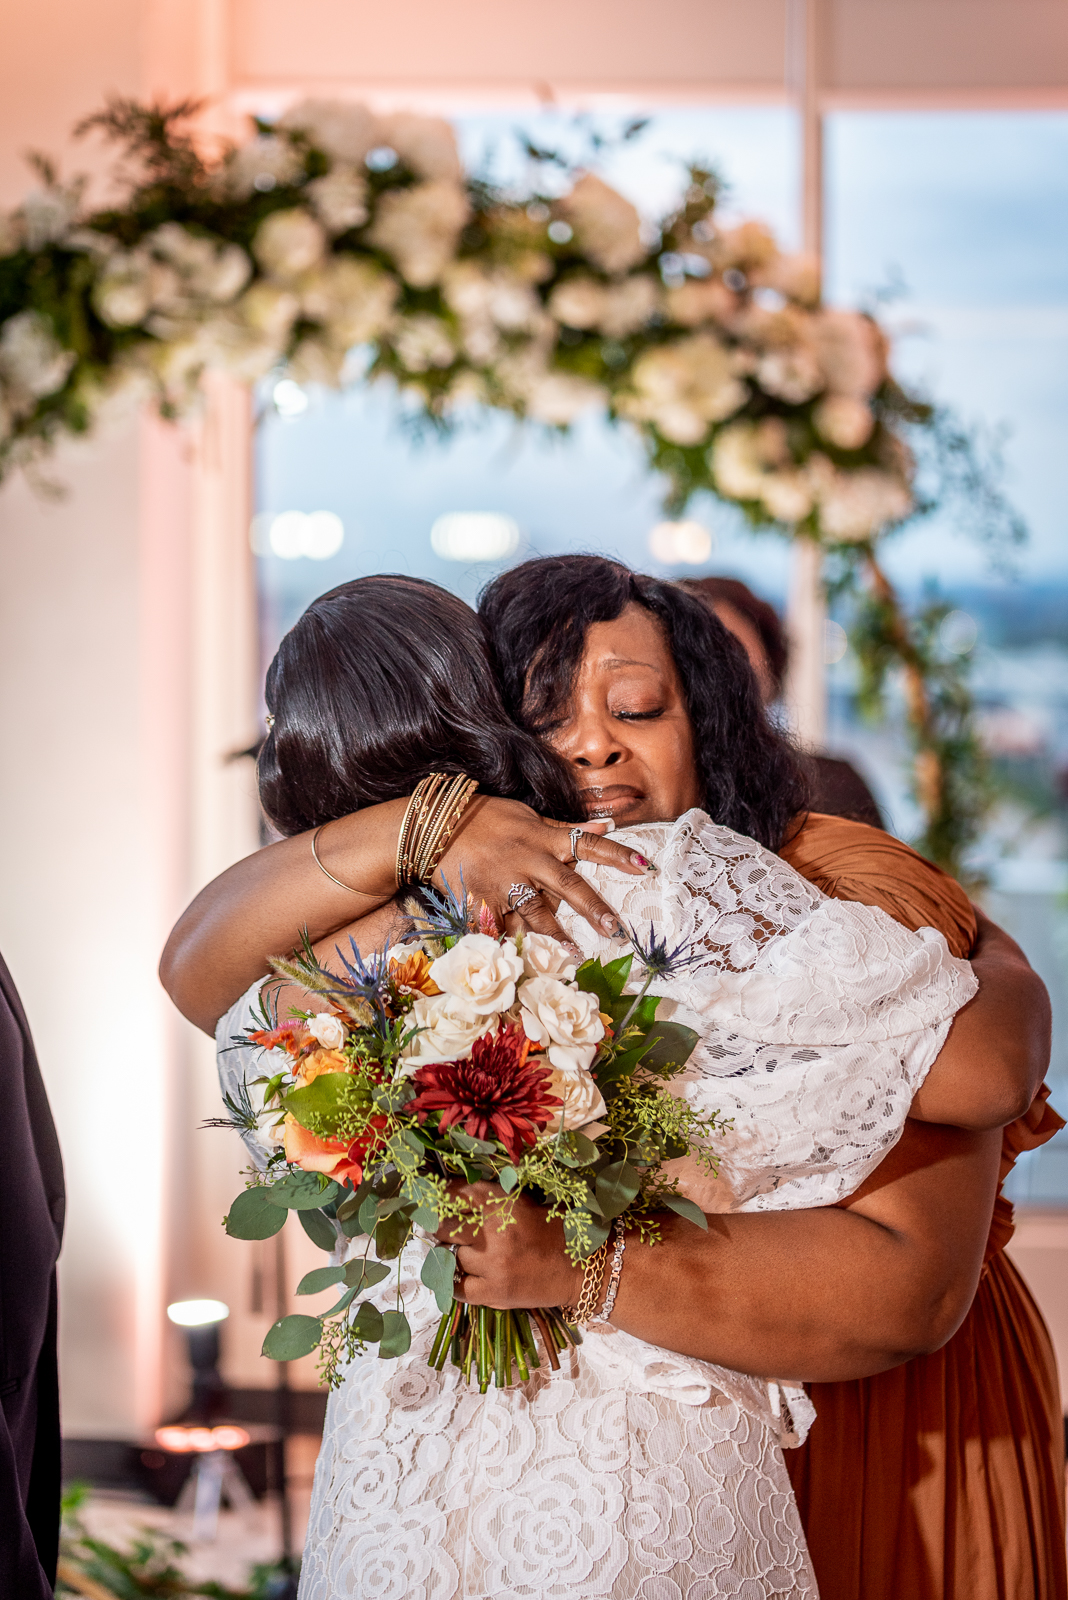 Bride with mom, hug, cry, sweet, candid wedding photo, African American bride, African American wedding, urban wedding ceremony at Penthouse Events, Ohio City, Cleveland Flats